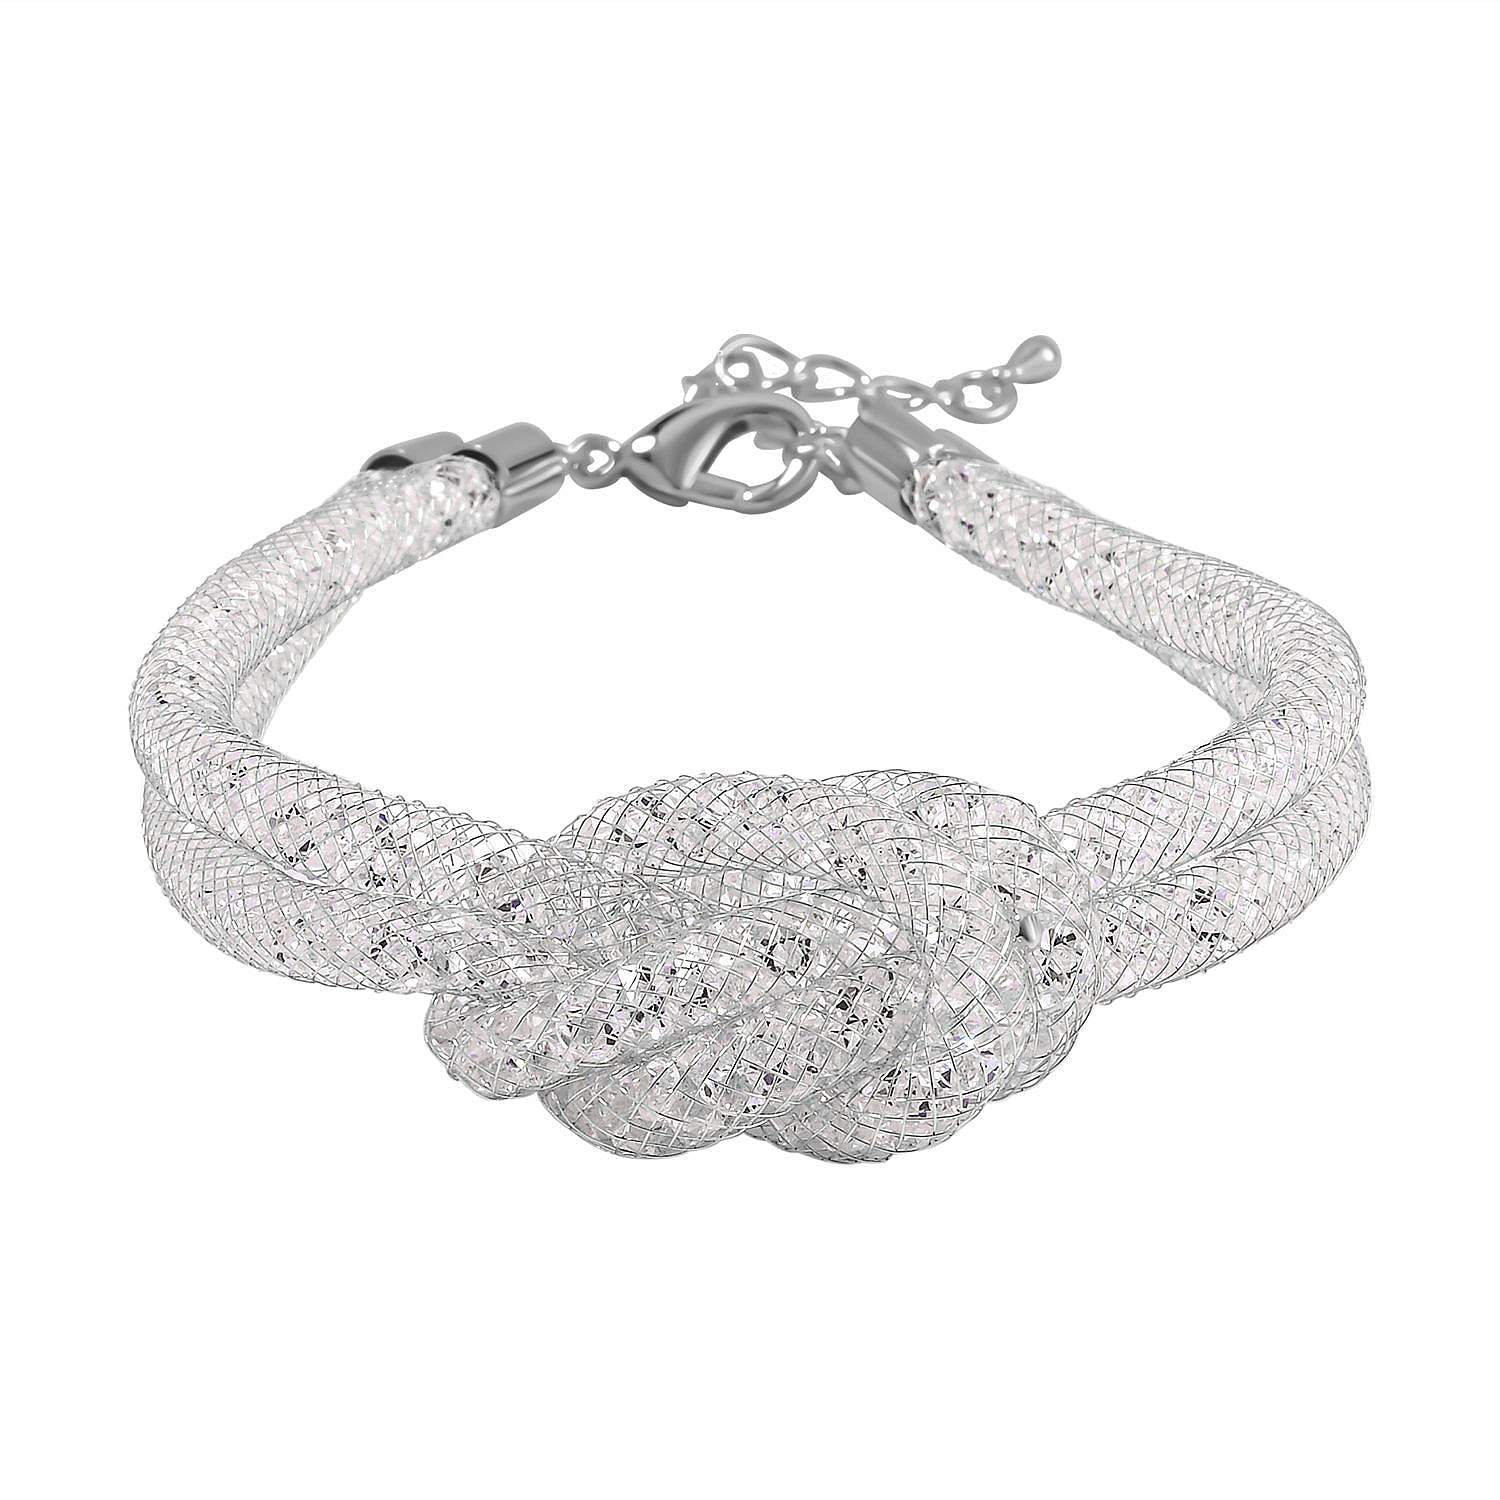 White Austrian Crystal Knot Bracelet (Size - 8-2 Inch Ext.) in Silver Tone